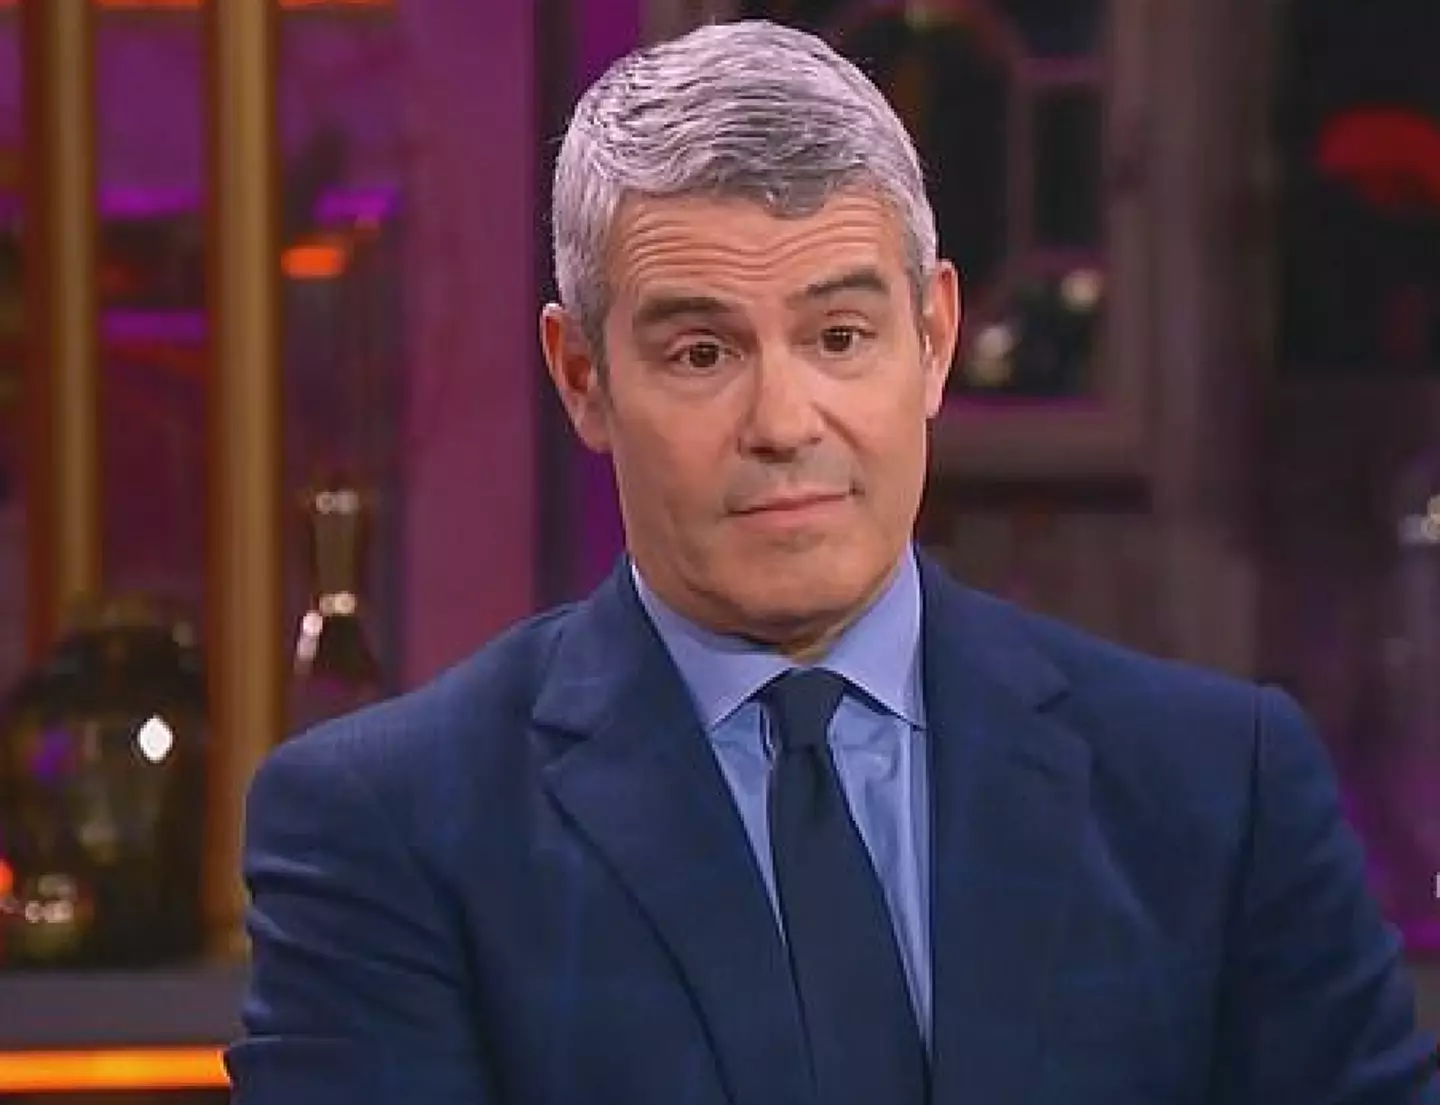 Host Andy Cohen called it the year's 'biggest story'.